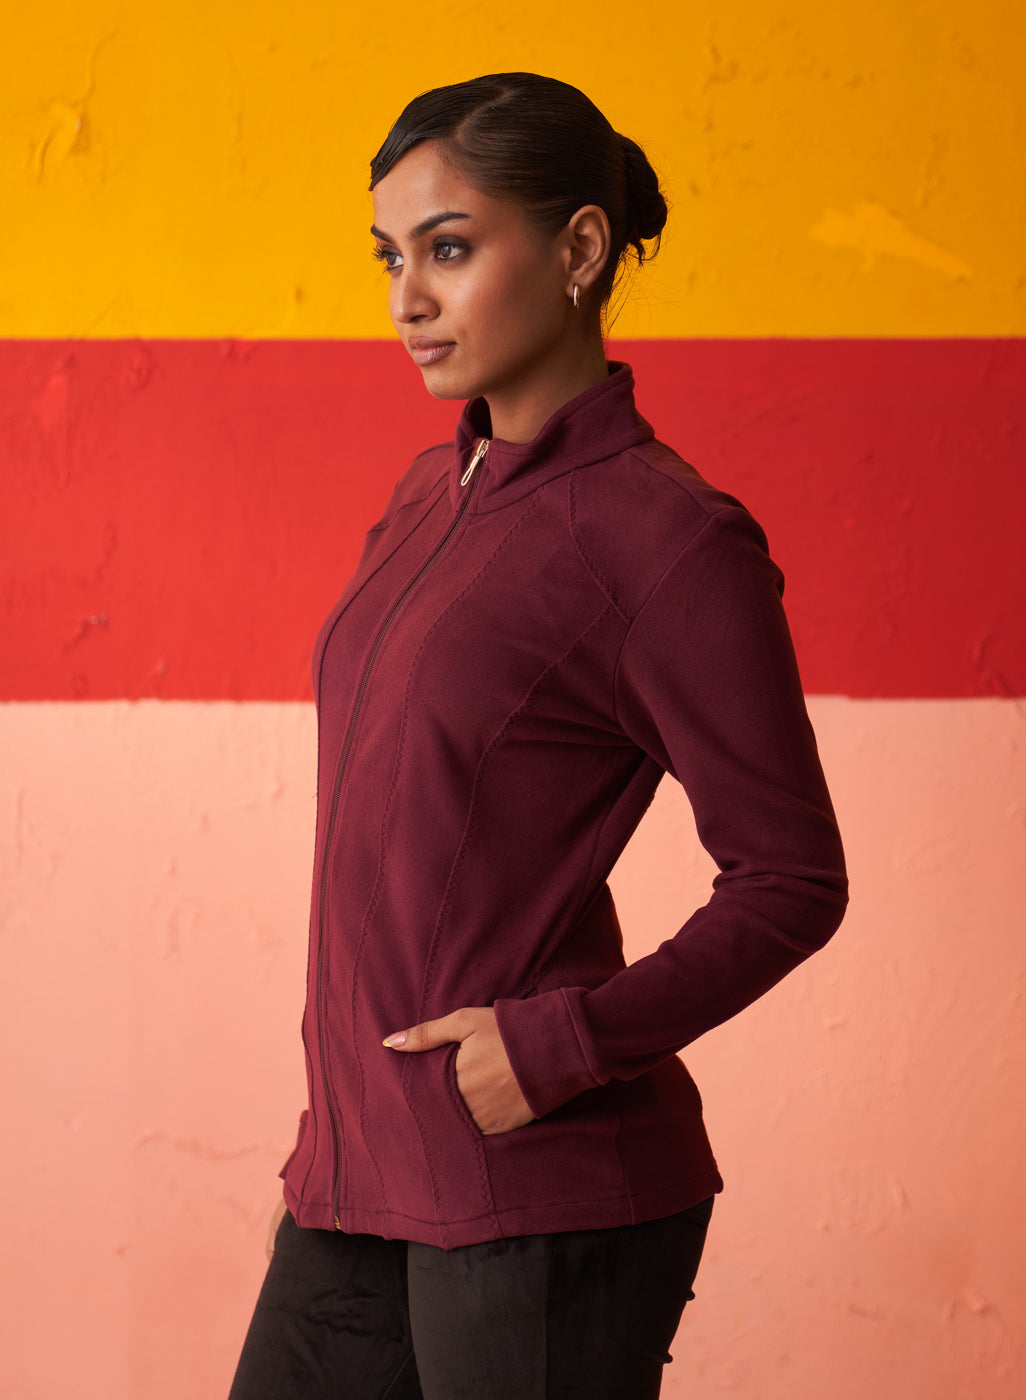 Maroon High-neck Jacket for Women